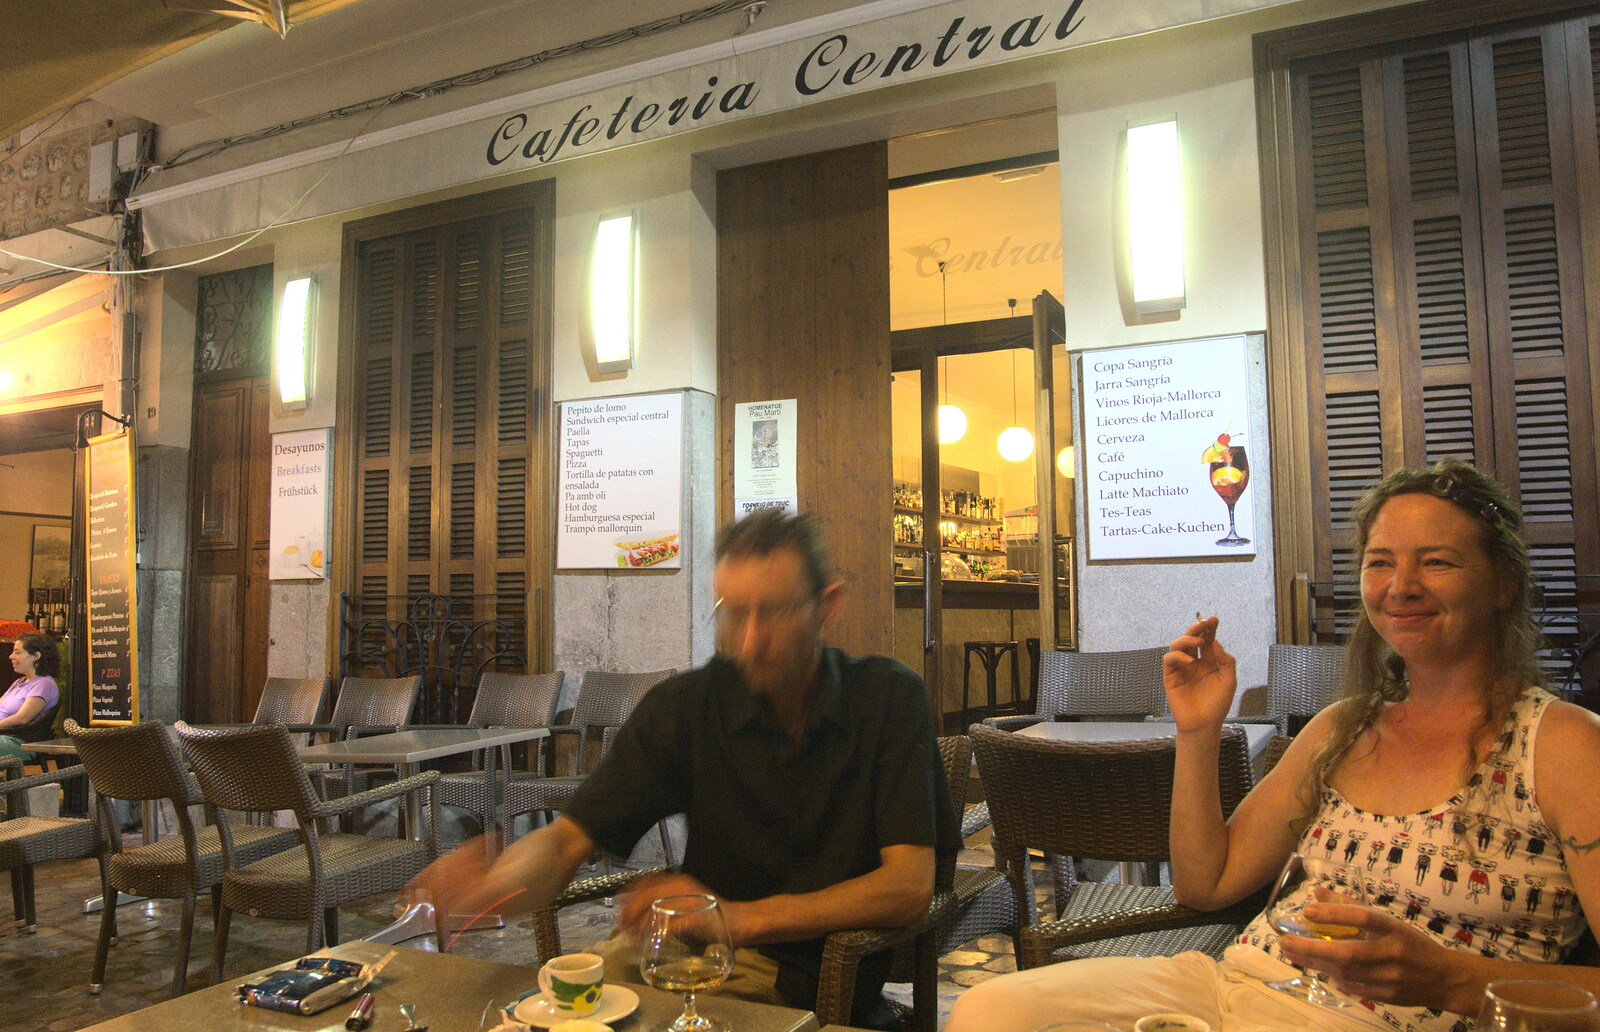 Philly and Davida at Cafeteria Central from A Trip to Sóller, Mallorca, Spain - 8th-14th September 2012